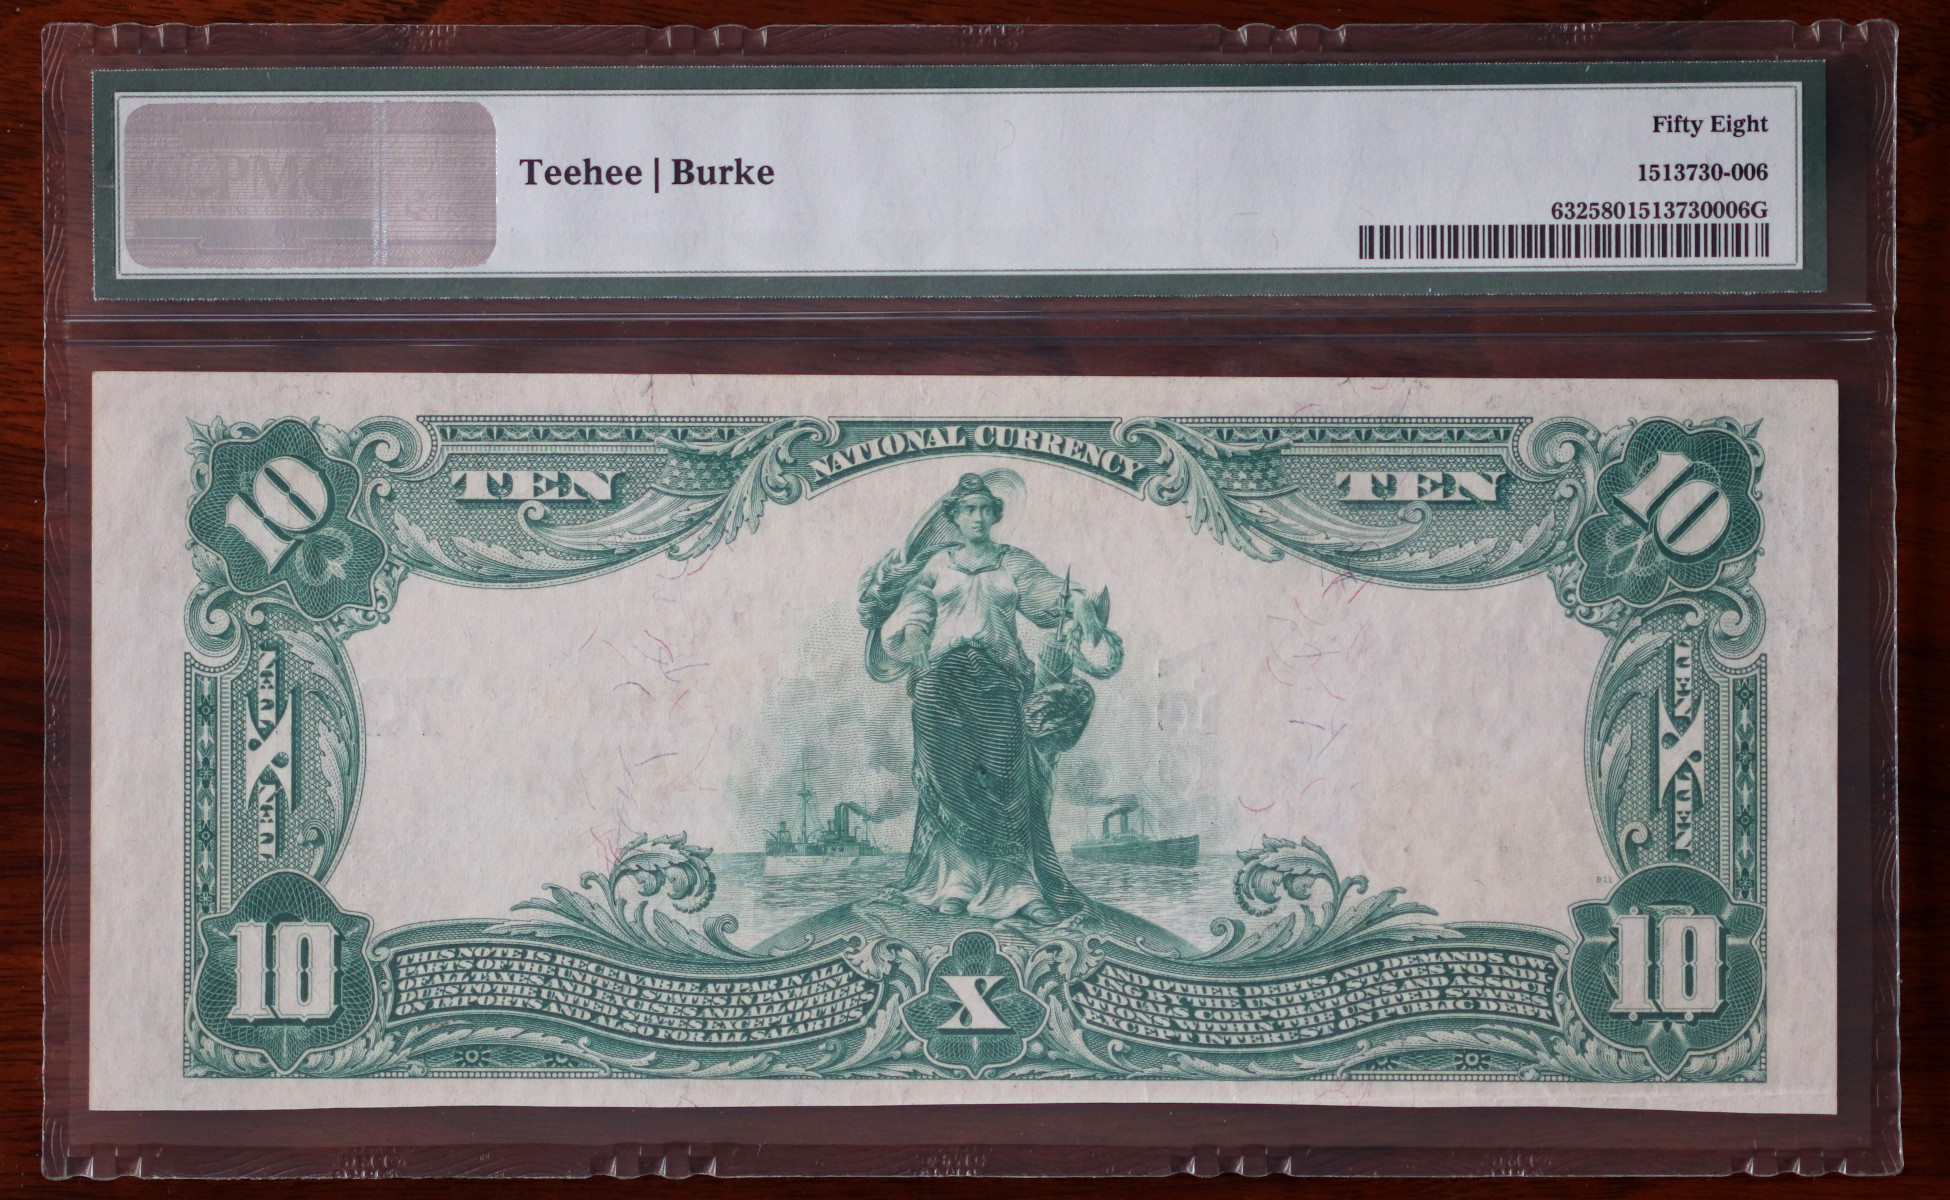 A $10 National Bank Note, San Pedro, certified PMG Choice About Uncirculated 58, from The South Bay Collection of Rare National Bank Notes, offered by Palos Verdes Coin Exchange